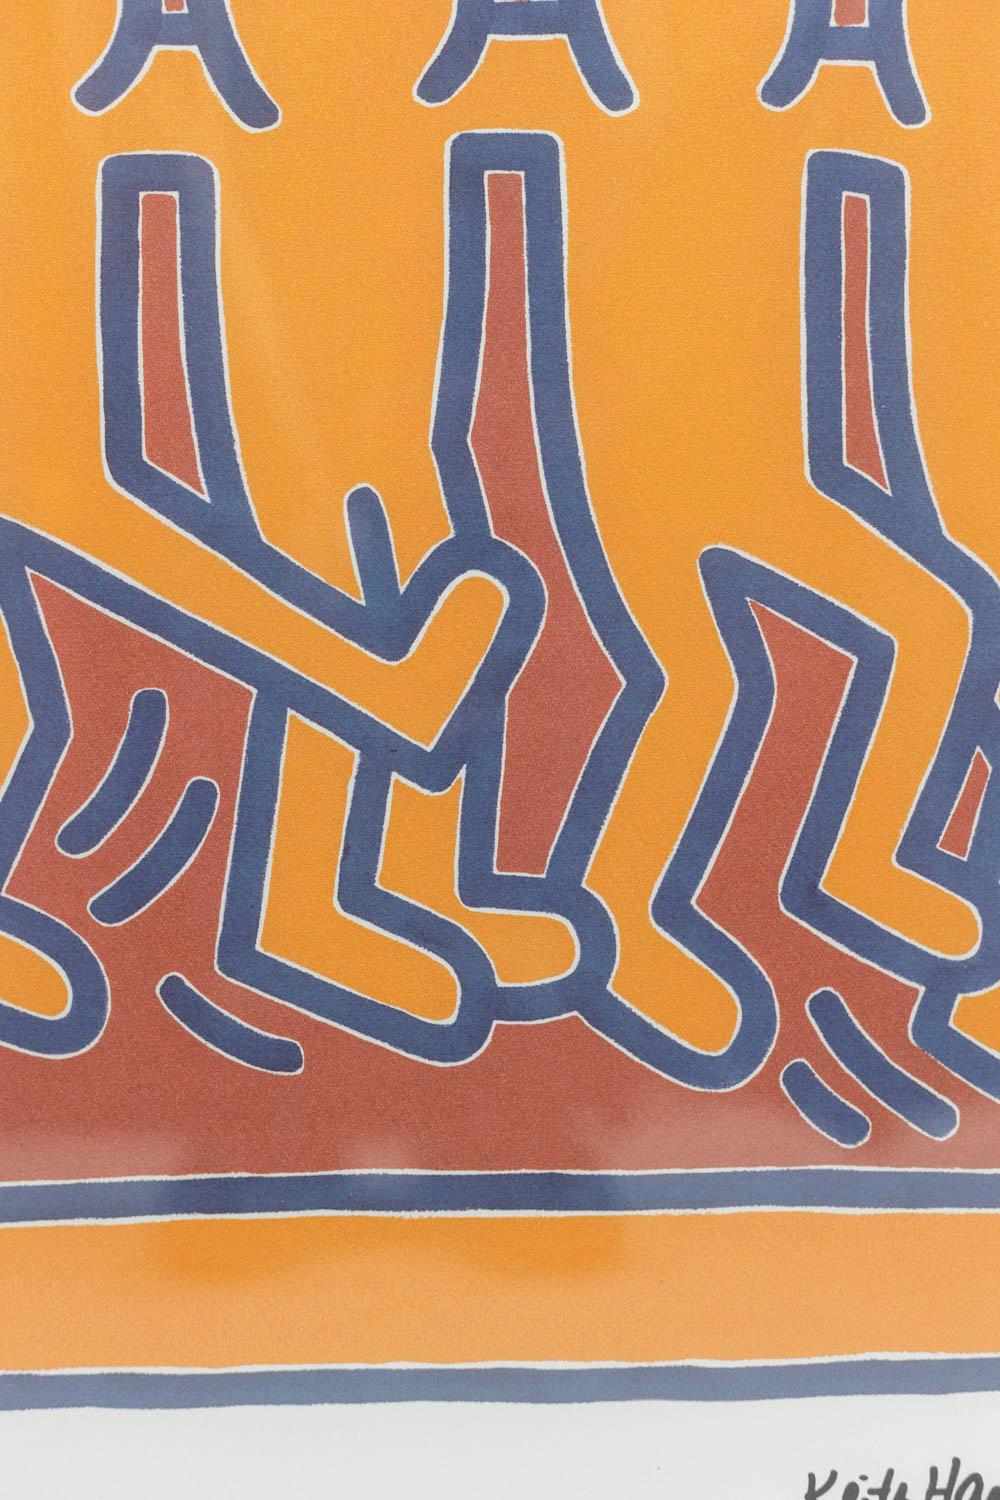 20th Century Keith Haring, Lithography, 1990s